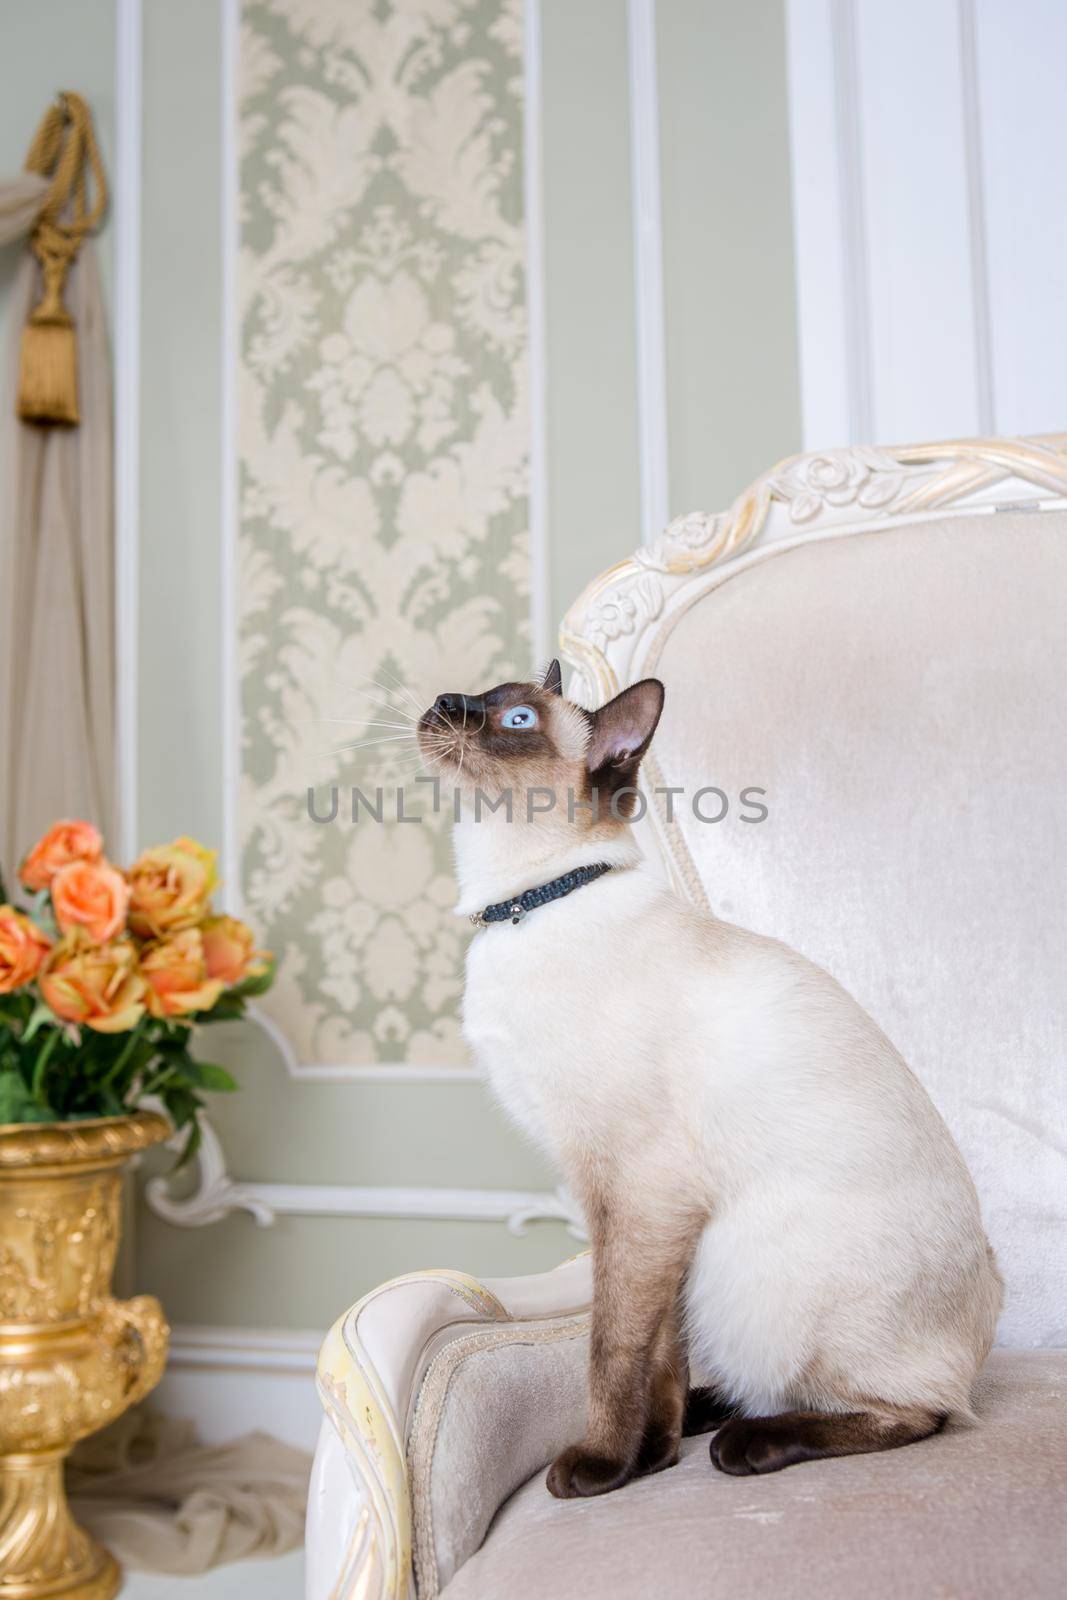 The theme of decoration and jewelry for animals. Beautiful cat woman posing on a vintage chair in baroque interior. Mekogon Bobtail or Thai cat without a tail with a necklace on its neck by Tomashevska